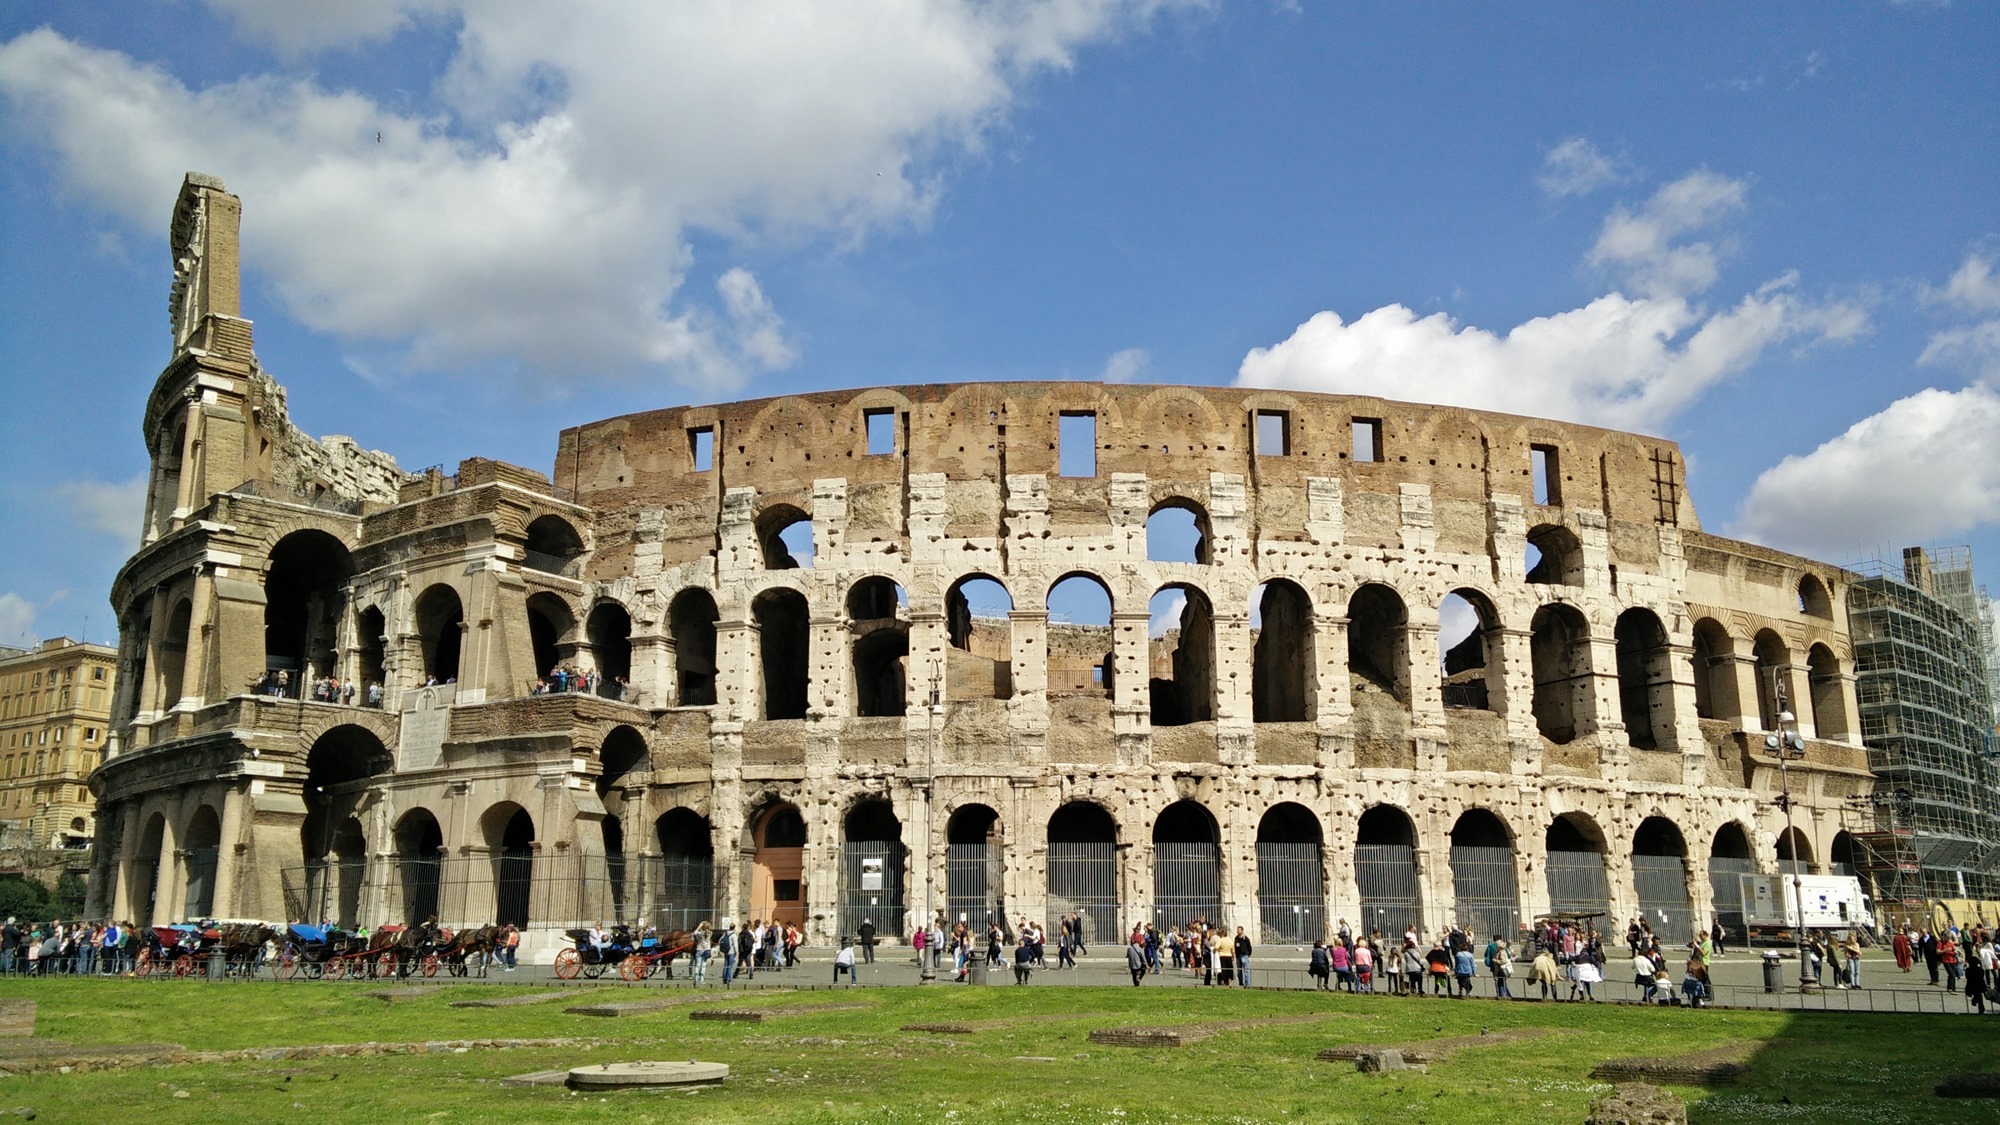 The Colosseum : Rome Italy | Visions of Travel
